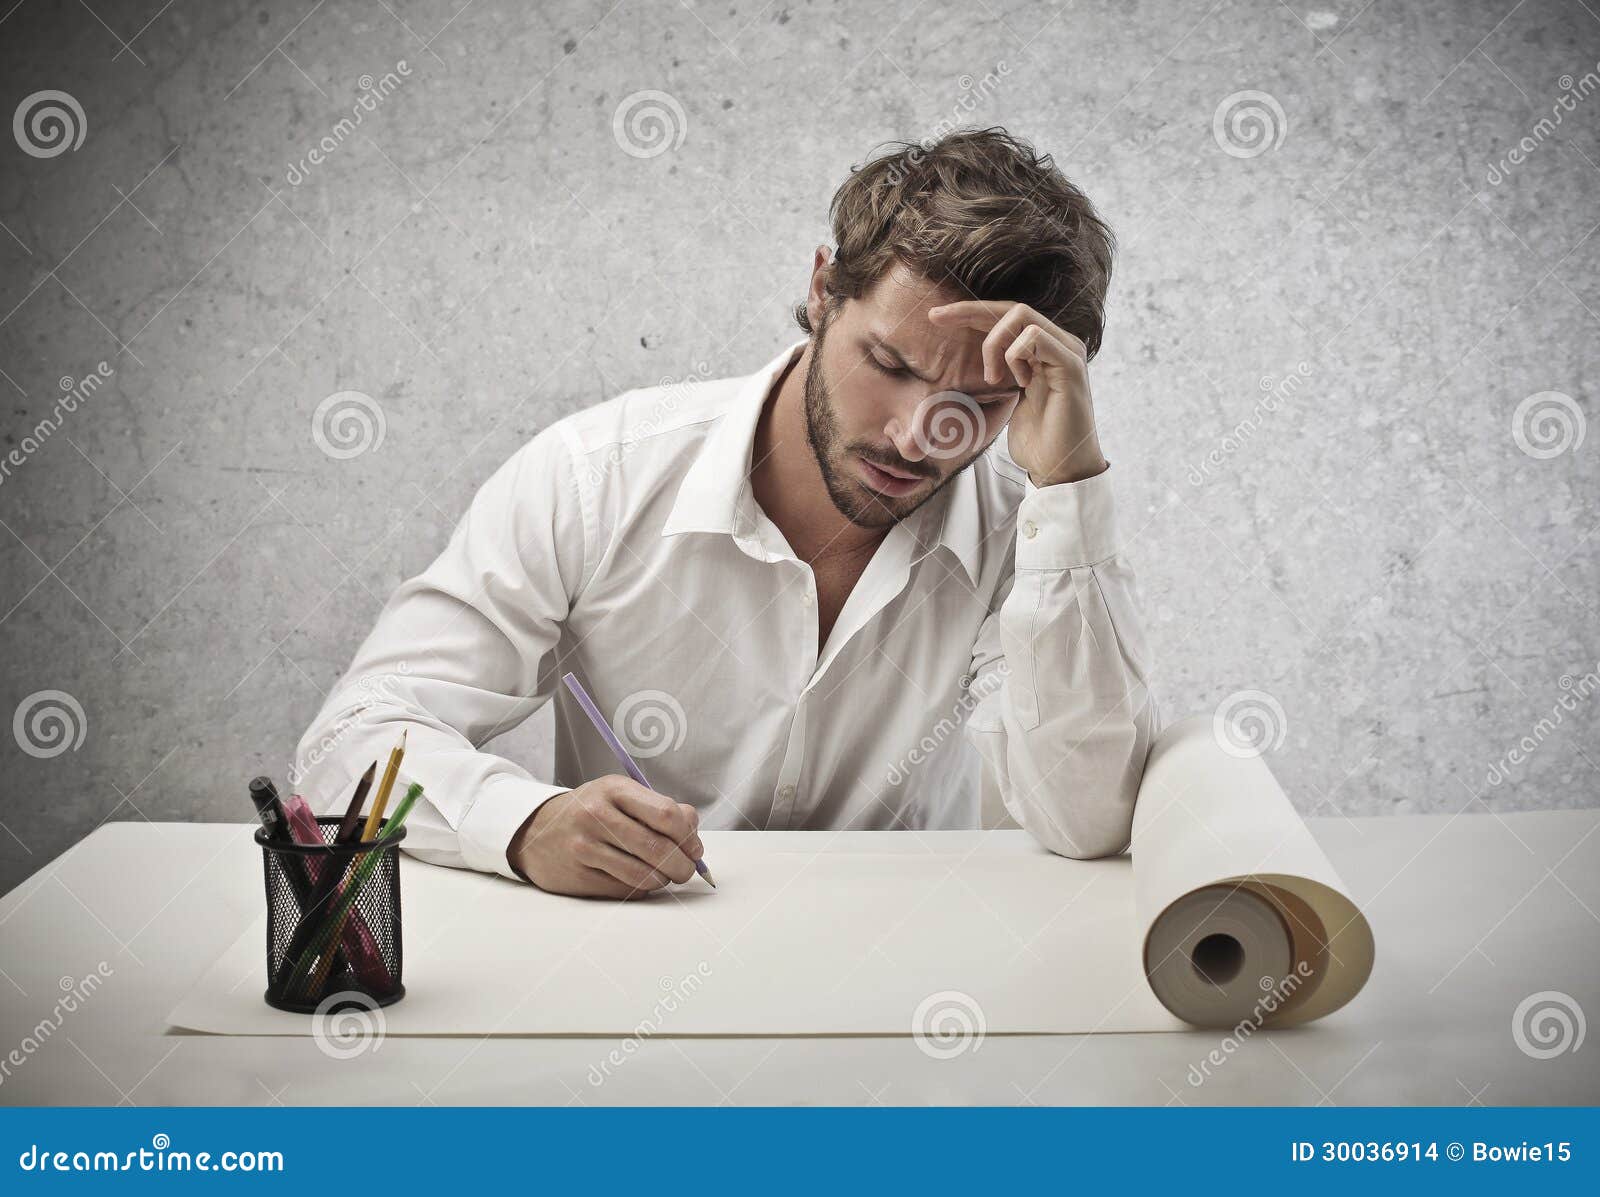 Man drawing stock photo. Image of color, desk, creative